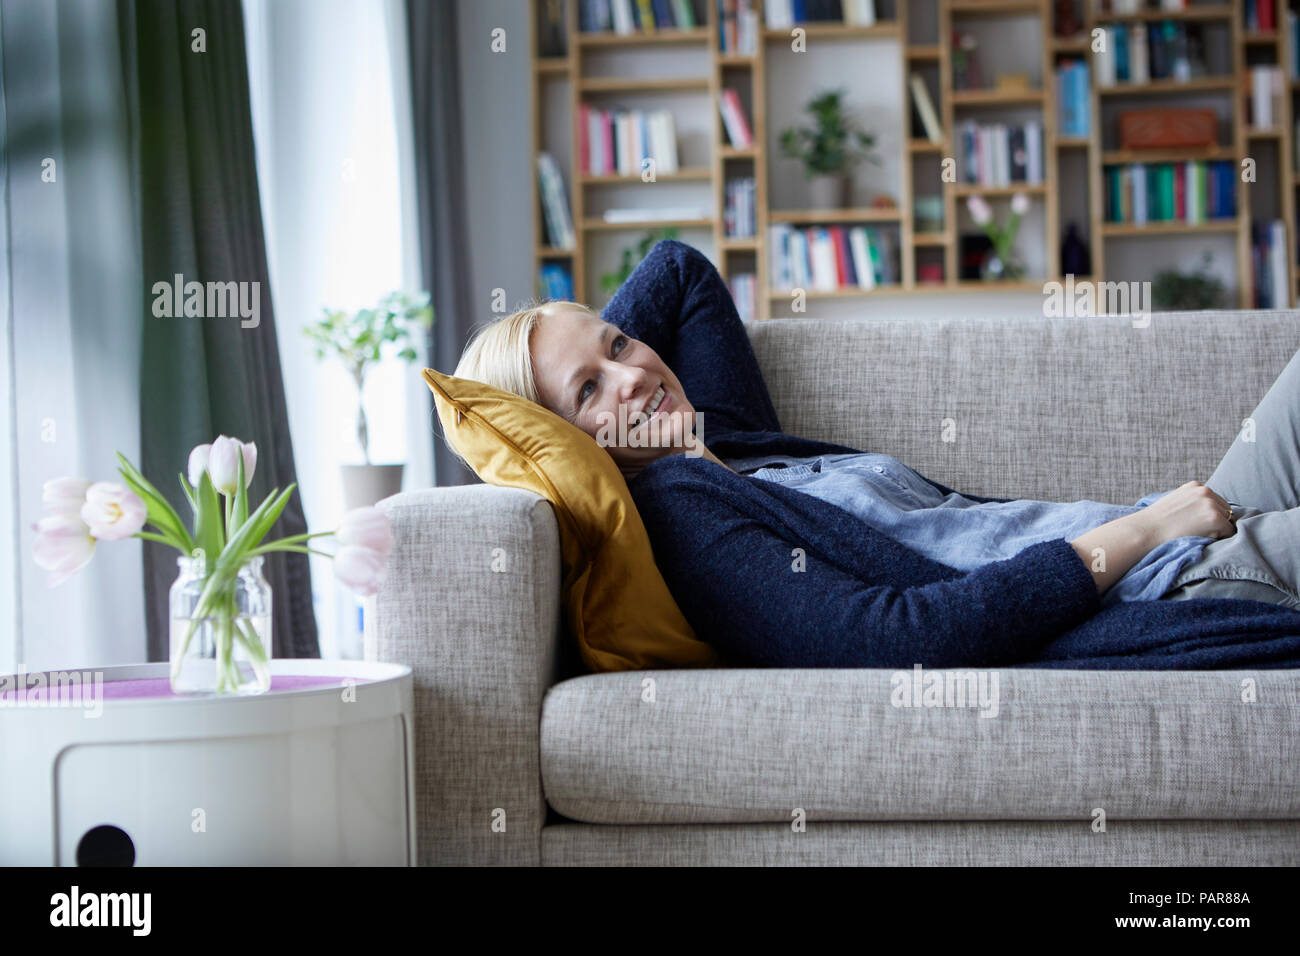 Woman relaxing at home, lying on couch Banque D'Images